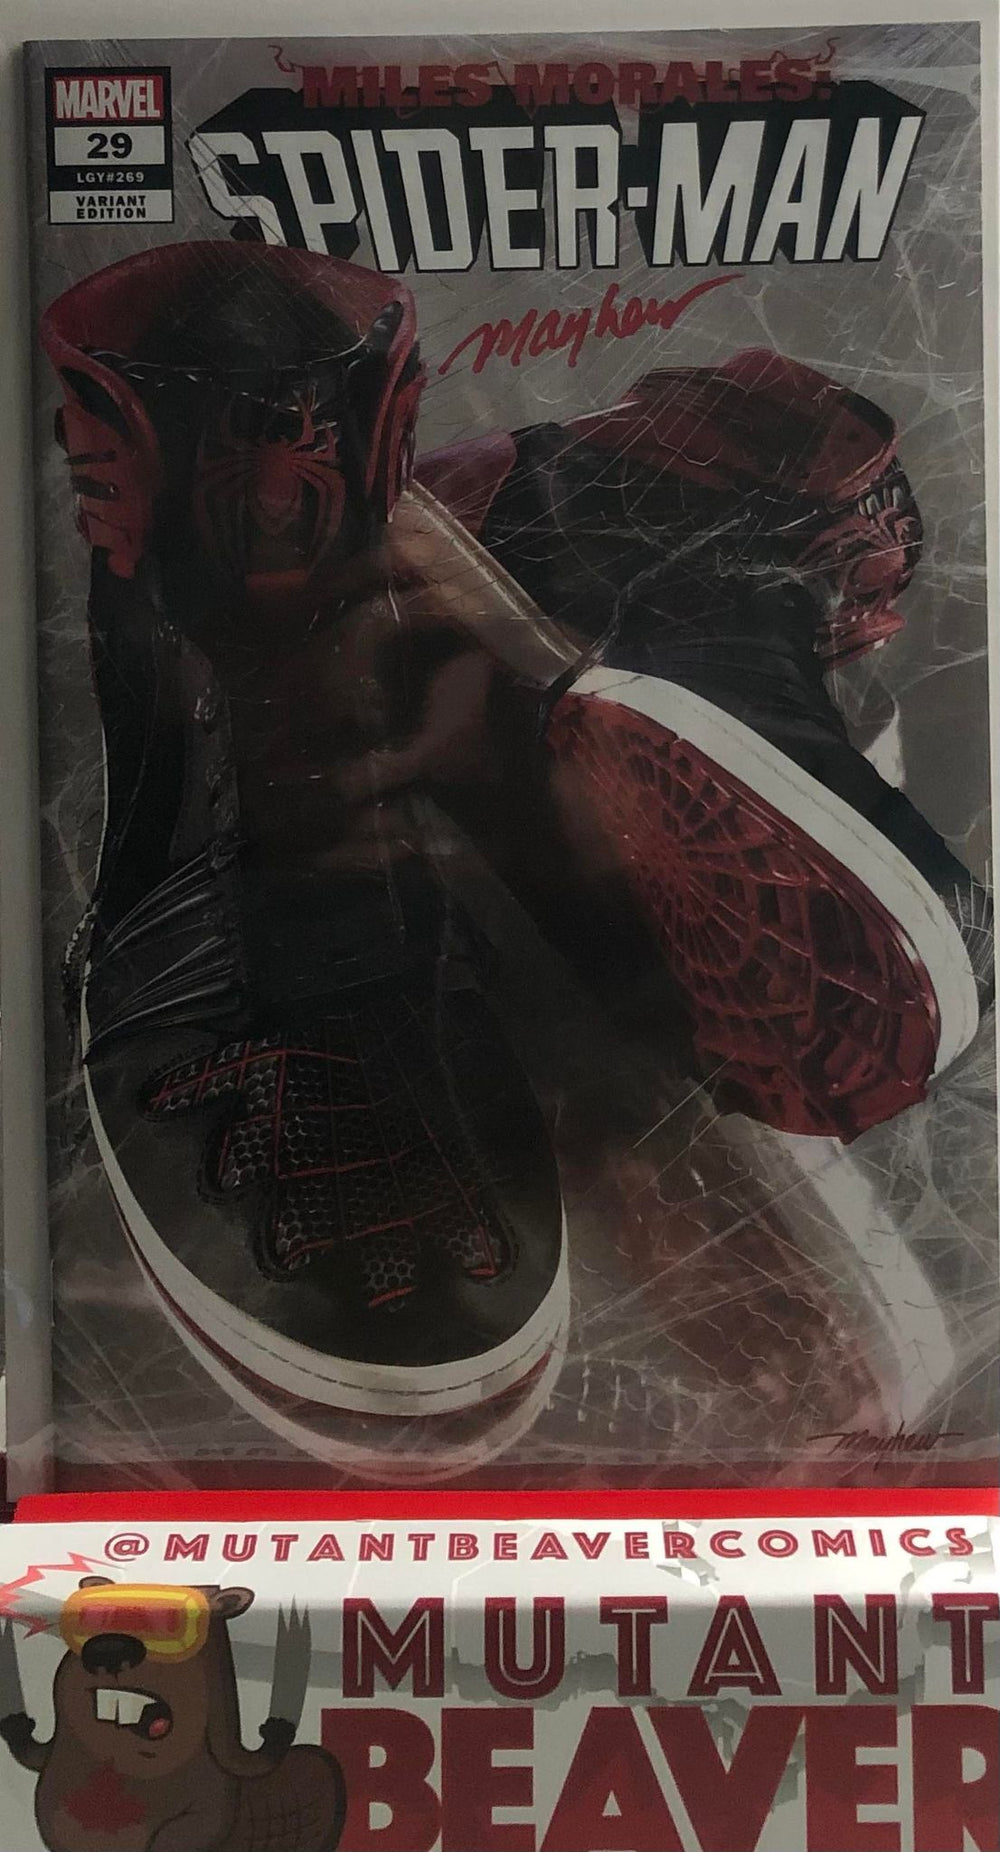 MILES MORALES SPIDER-MAN #29 Mike Mayhew SIGNED TRADE DRESS EXCLUSIVE